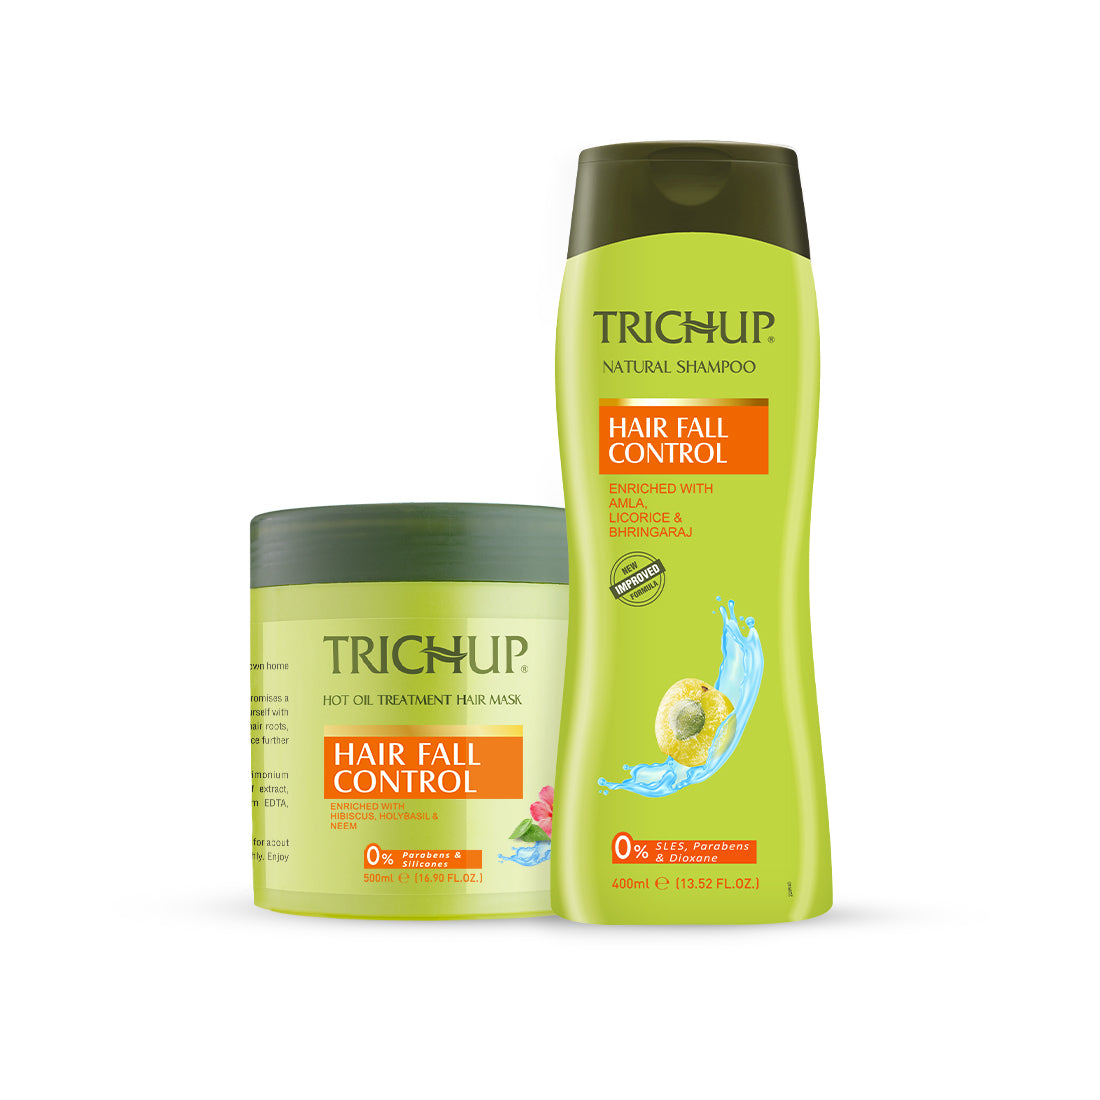 Trichup Hair Fall Control Shampoo & Hair Mask Kit - Enriched with Amla, & Bhringraj - Helps to Reduce Hair Fall, Strengthens Your Hair follicles & Improves Hair Texture - VasuStore